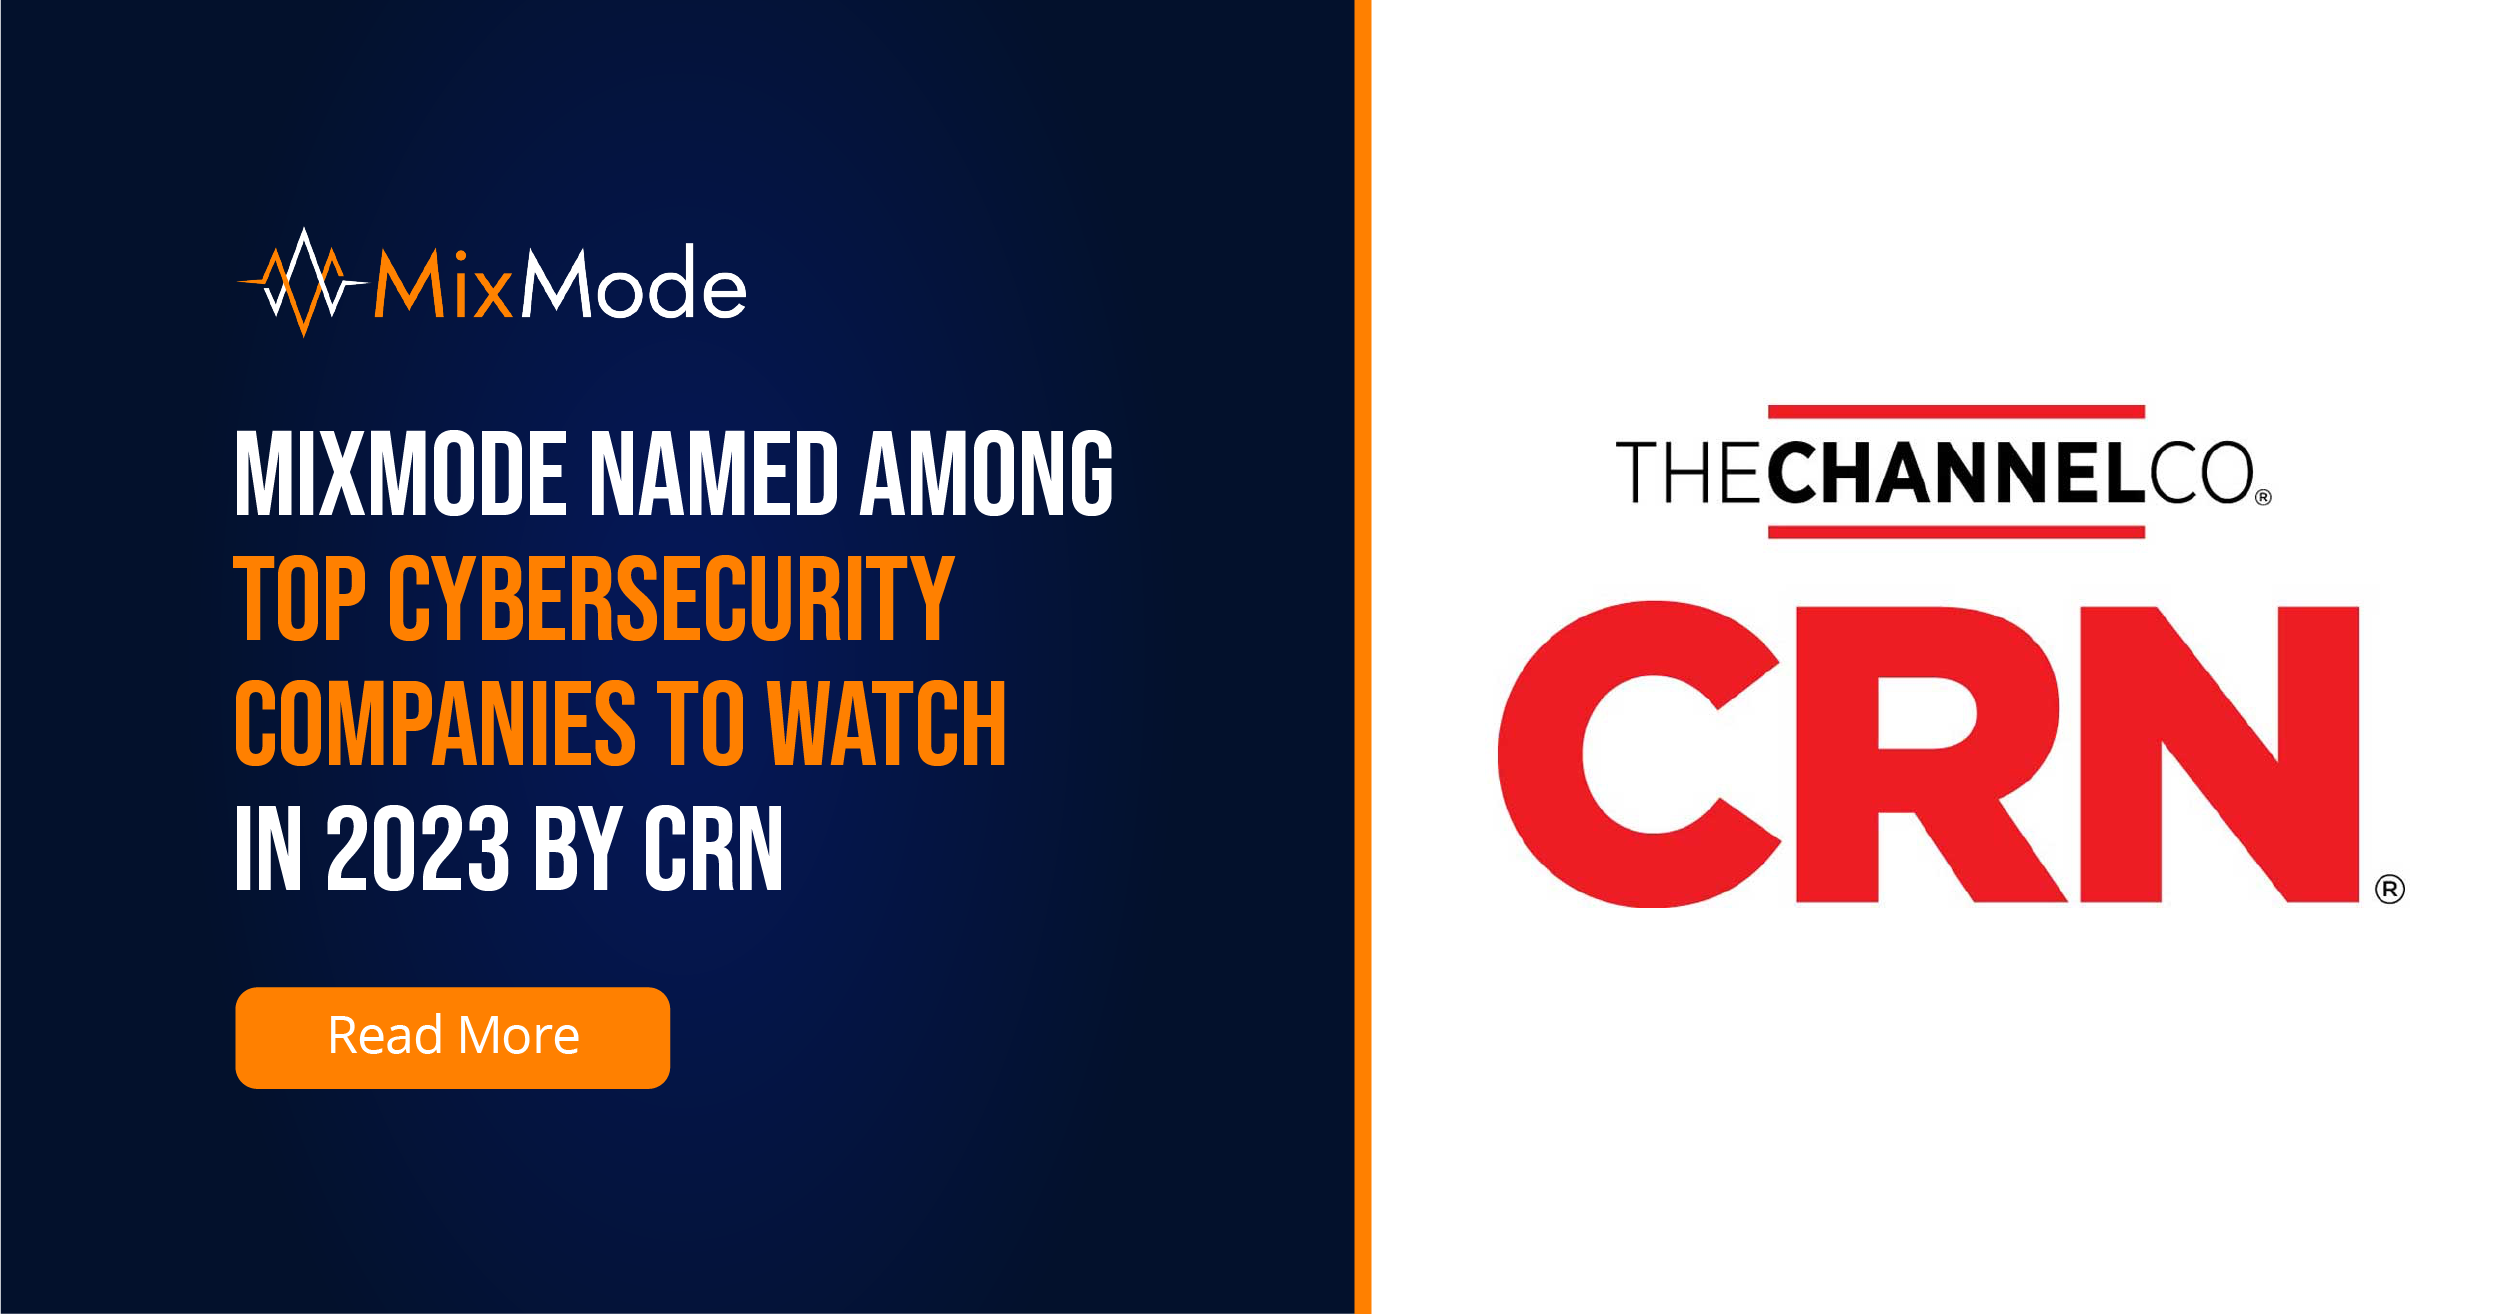 MixMode Named Among Top Cybersecurity Companies to Watch in 2023 CRN - MixMode